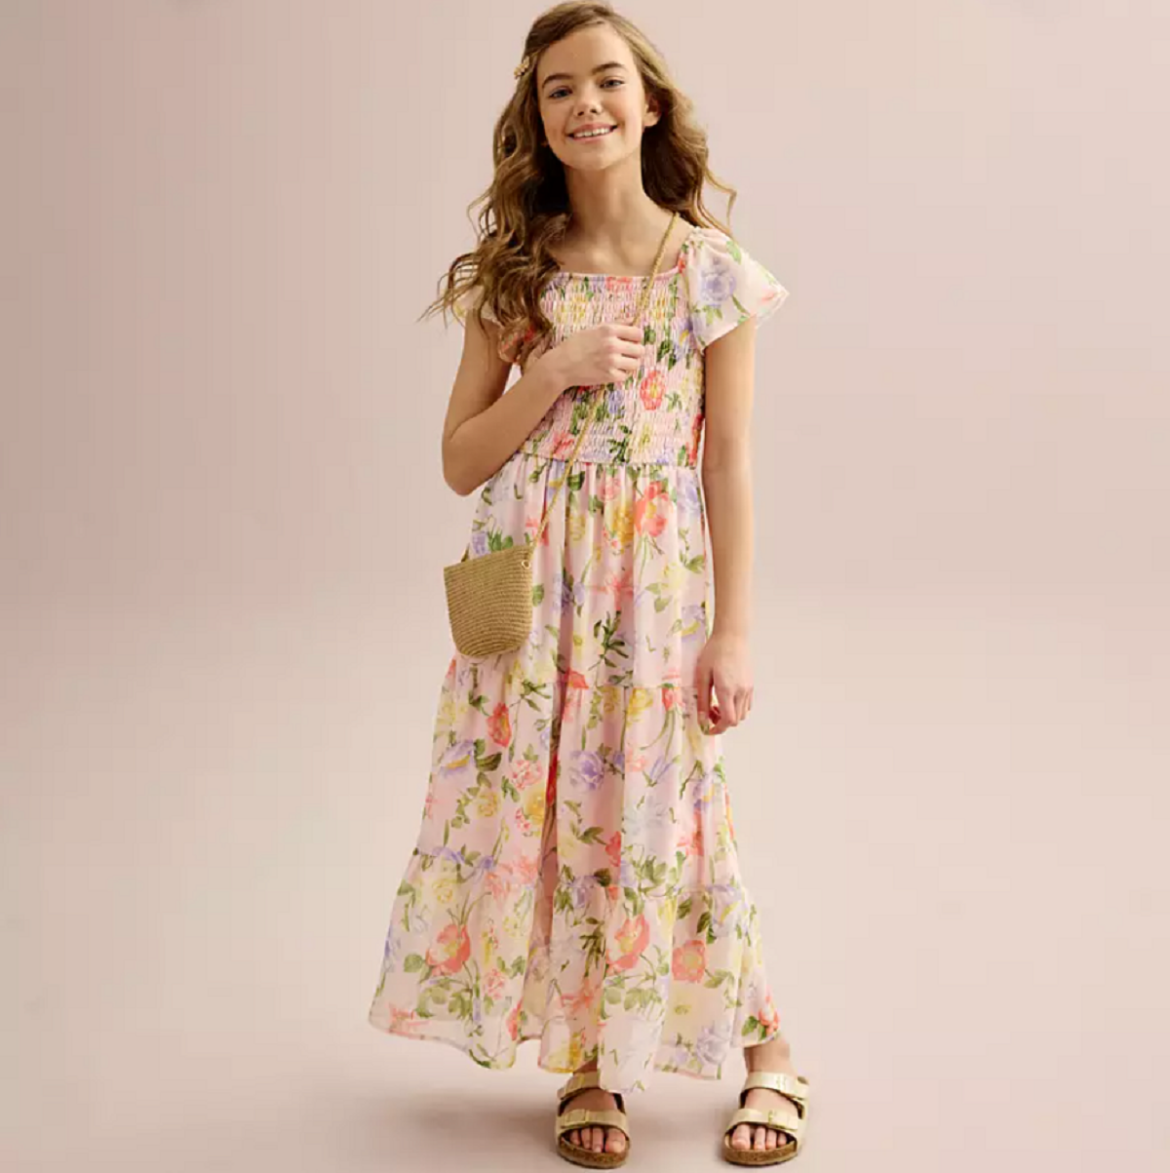 Girls 7-16 Speechless Ruffled Floral Dress with Purse, Easter season